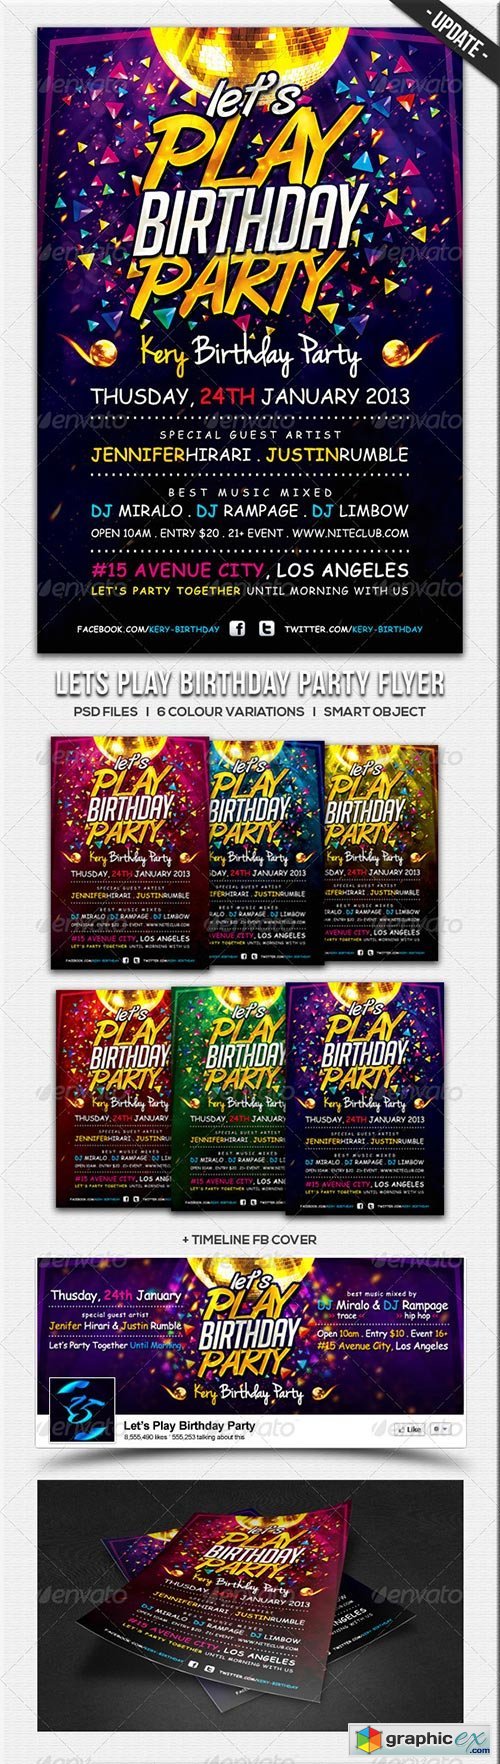 Lets Play Birthday Party Flyer Template